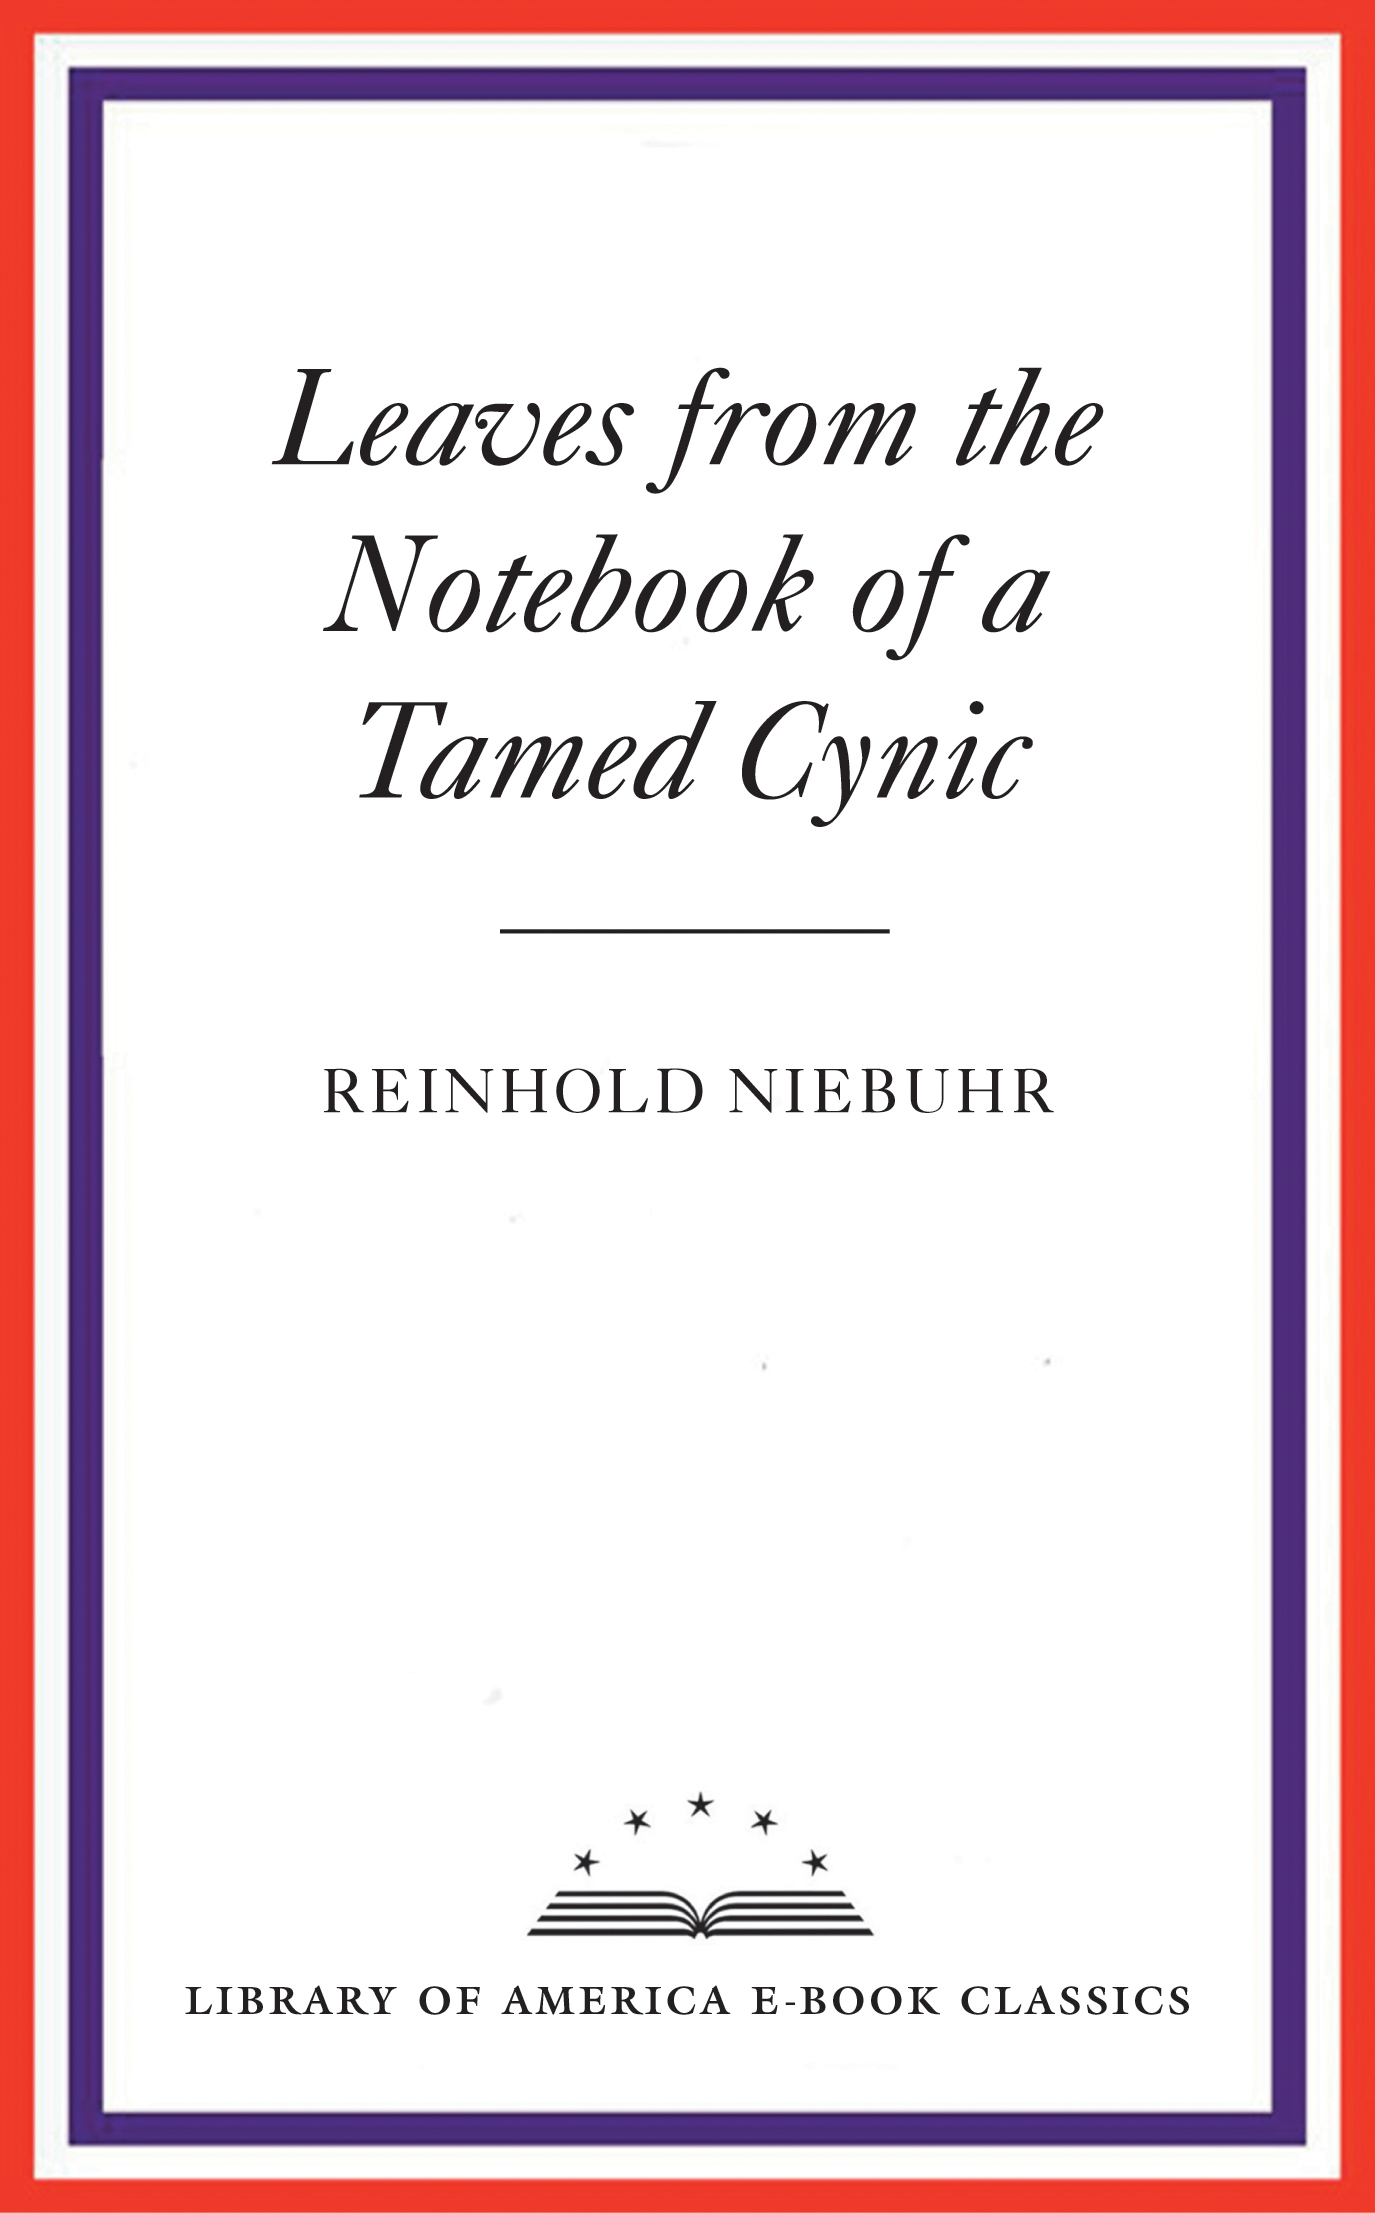 REINHOLD NIEBUHR LEAVES FROM THE NOTEBOOK OF A TAMED CYNIC Elisabeth Sifton - photo 1